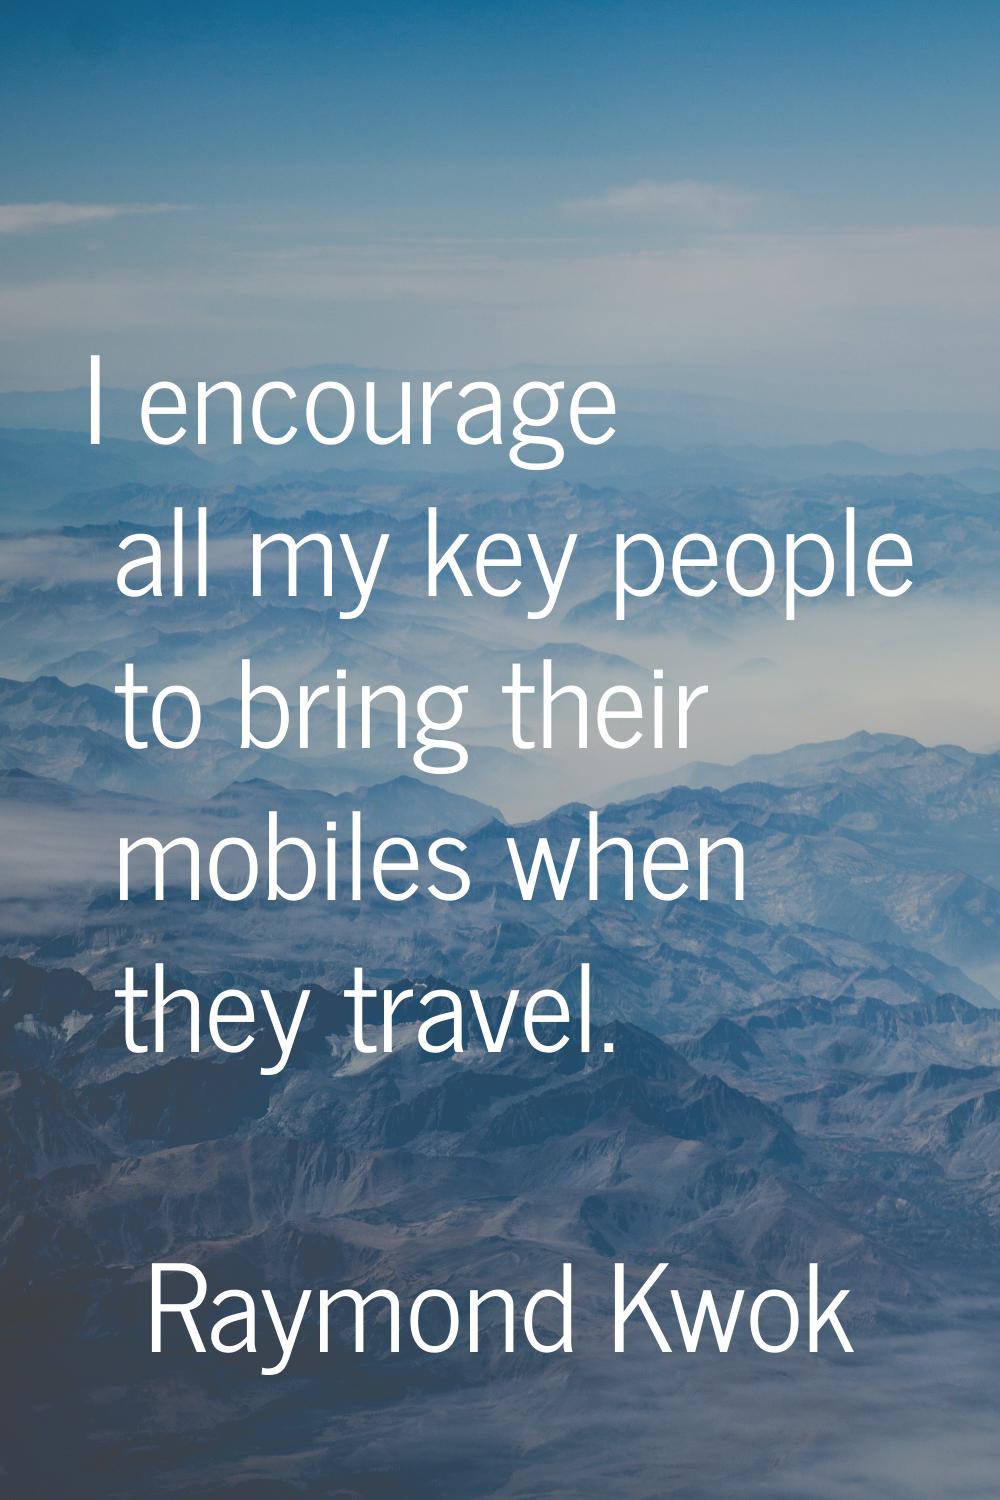 I encourage all my key people to bring their mobiles when they travel.